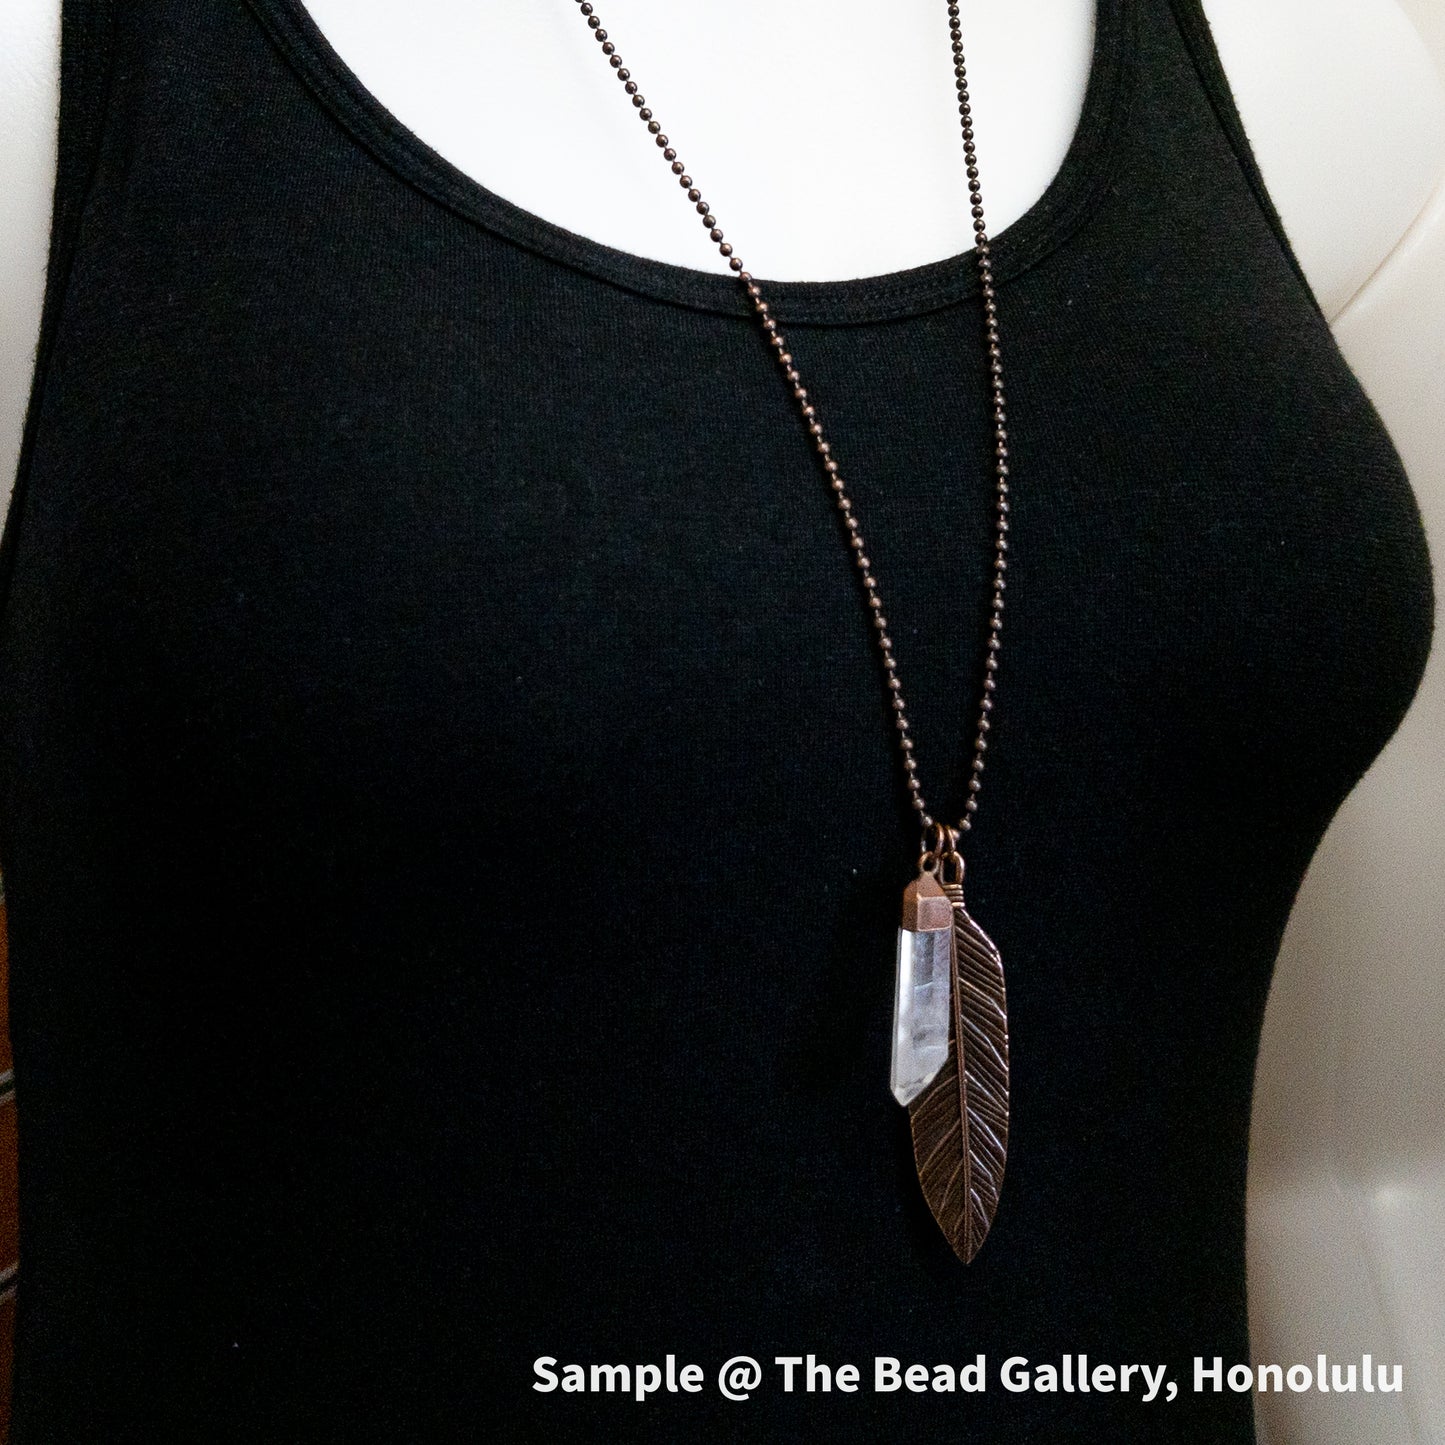 Antique Copper Free Spirit Feather Necklace (3 Charm Options Available)